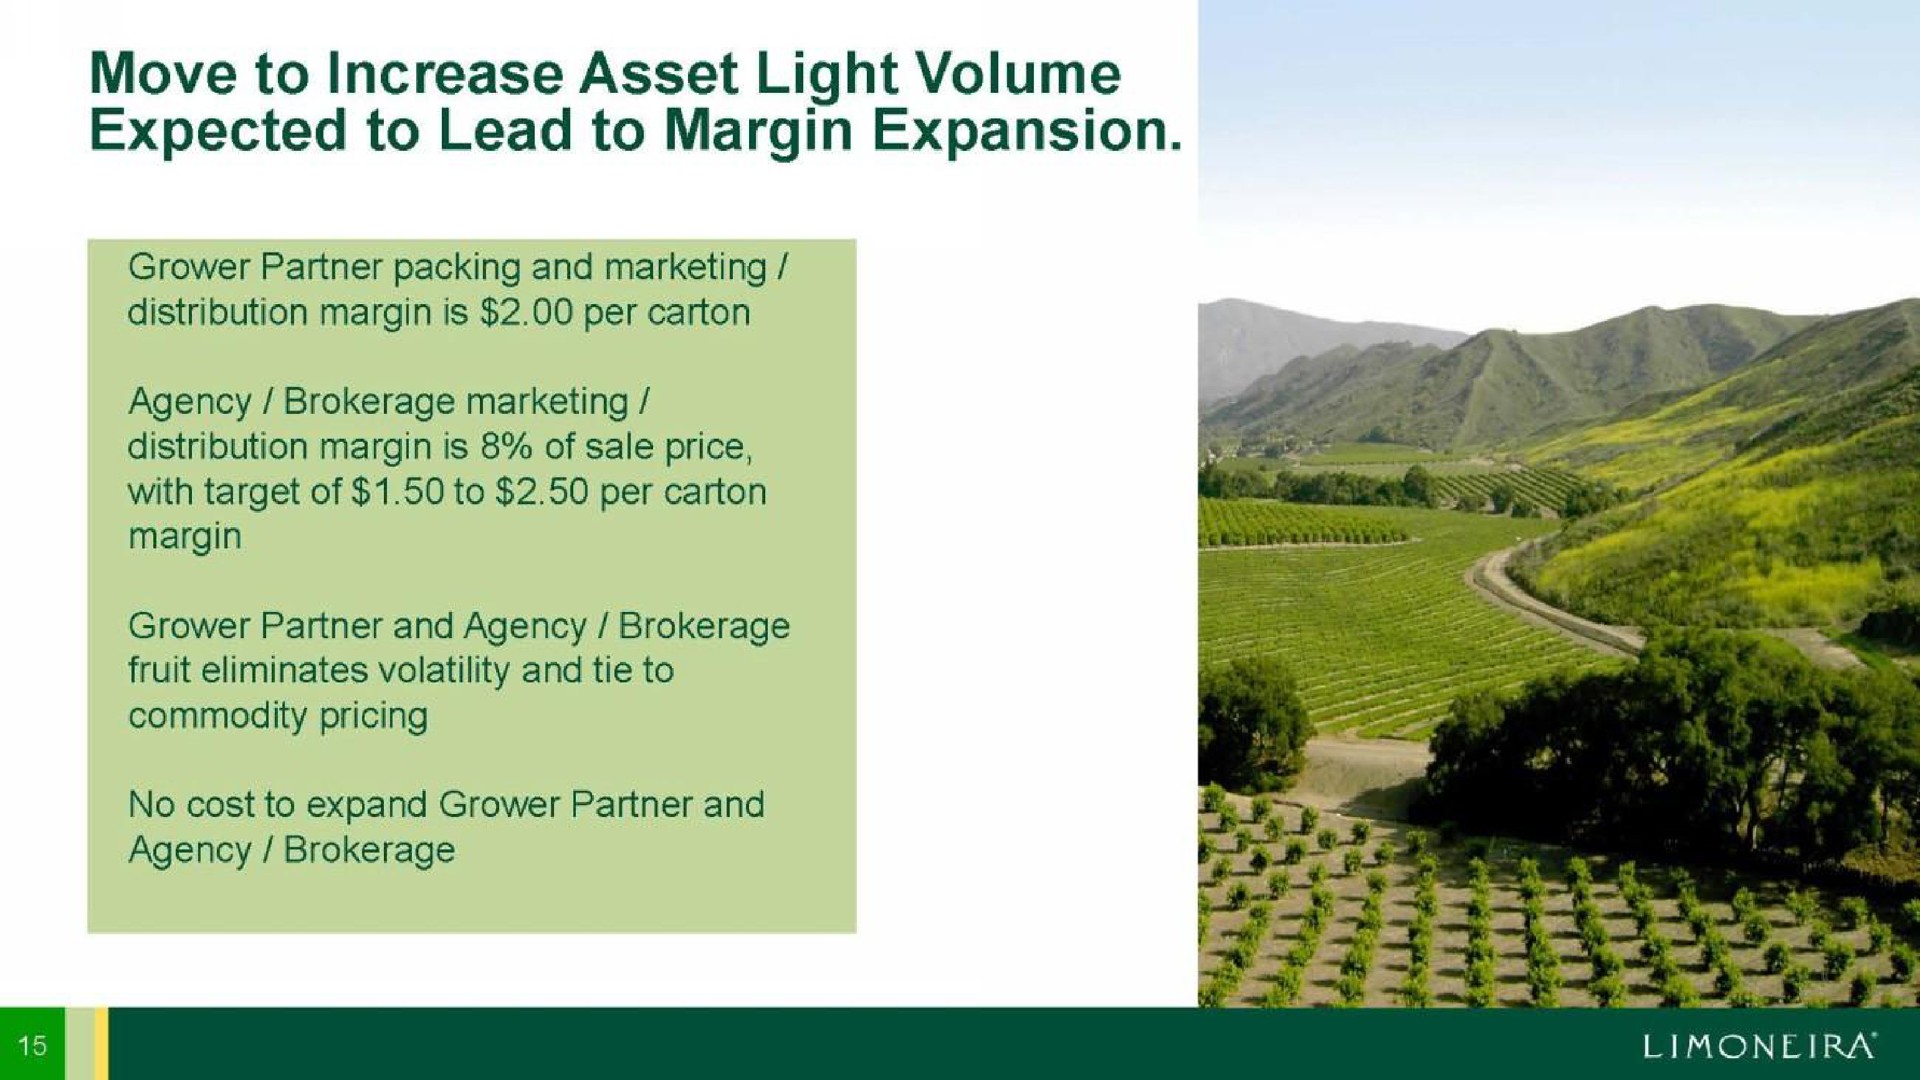 move to increase asset light volume expected to lead to margin expansion | Limoneira